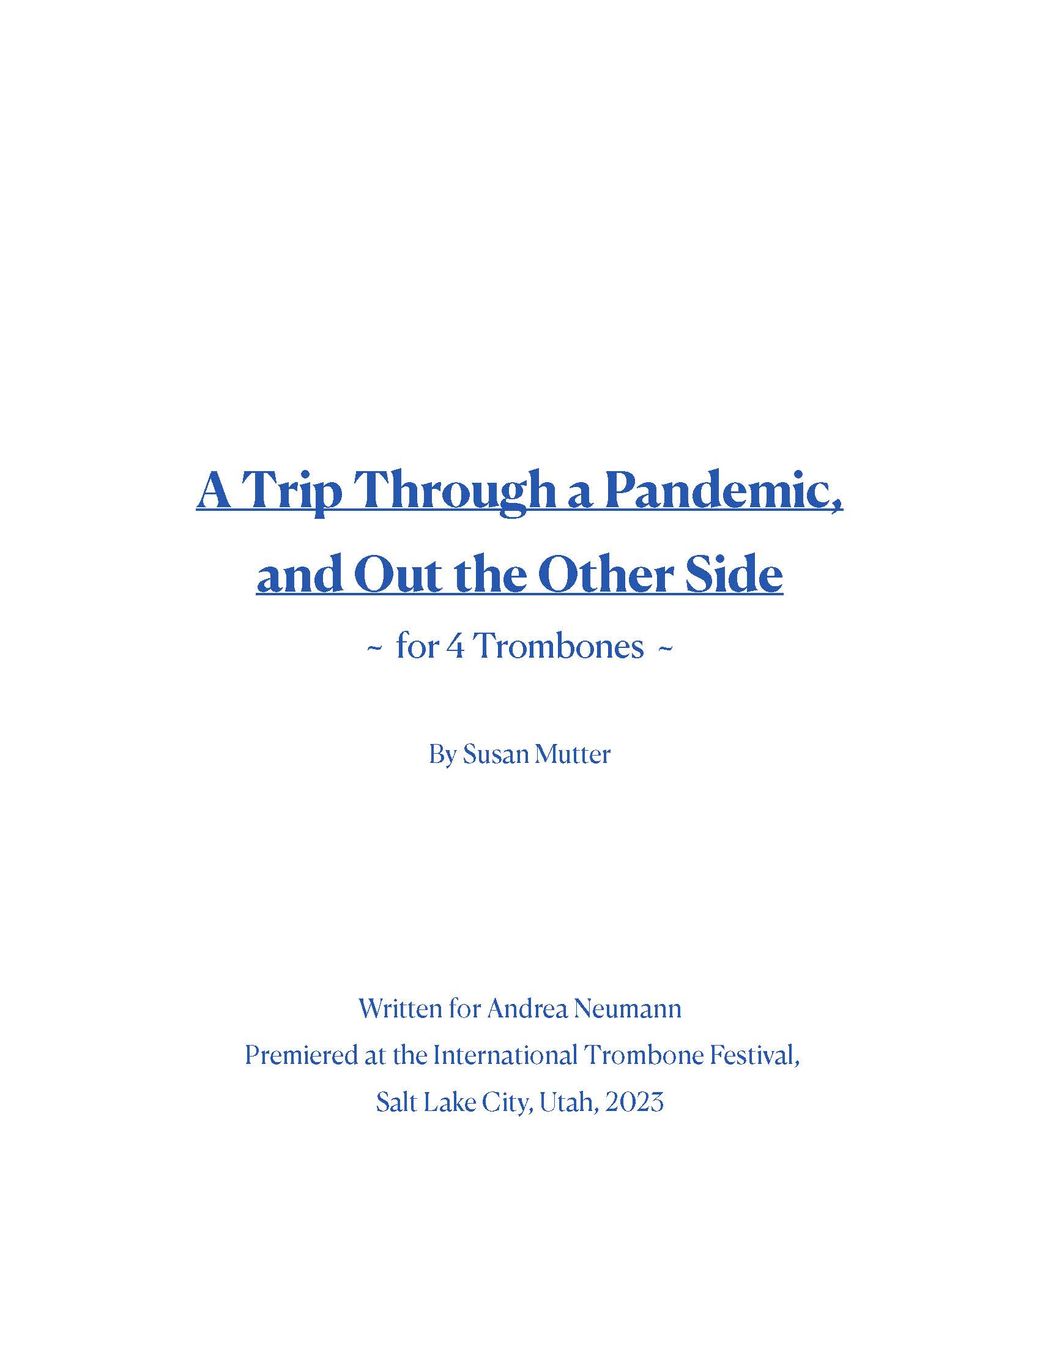 Susan Mutter: A Trip Through a Pandemic, and Out the Other Side, for 4 Trombones